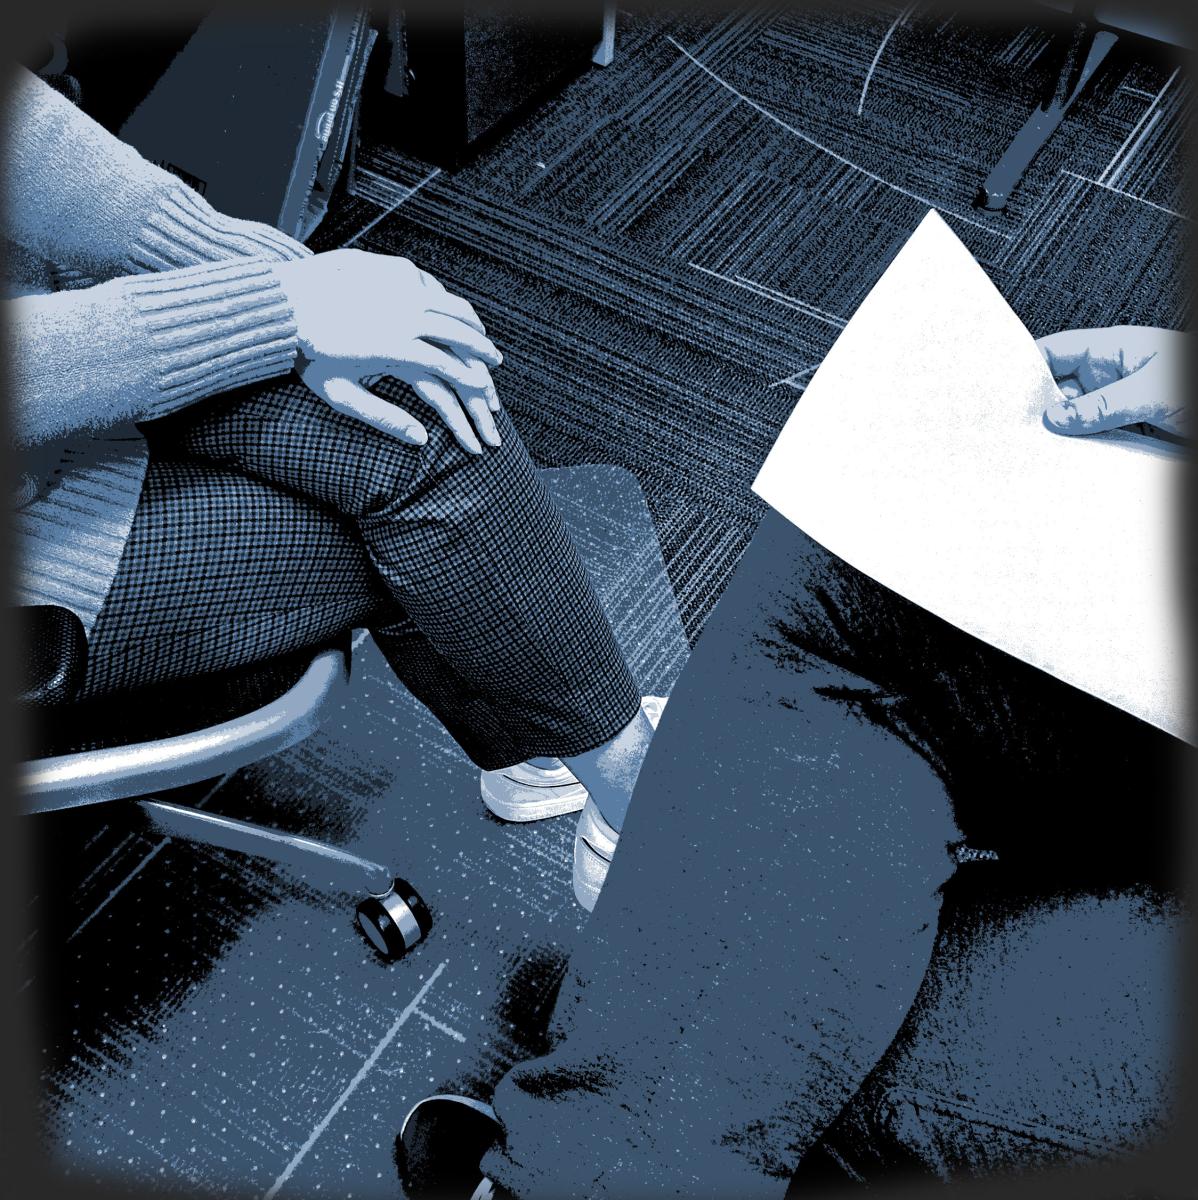 Two people seated across from each other. Legs are crossed. One person is holding a piece of paper